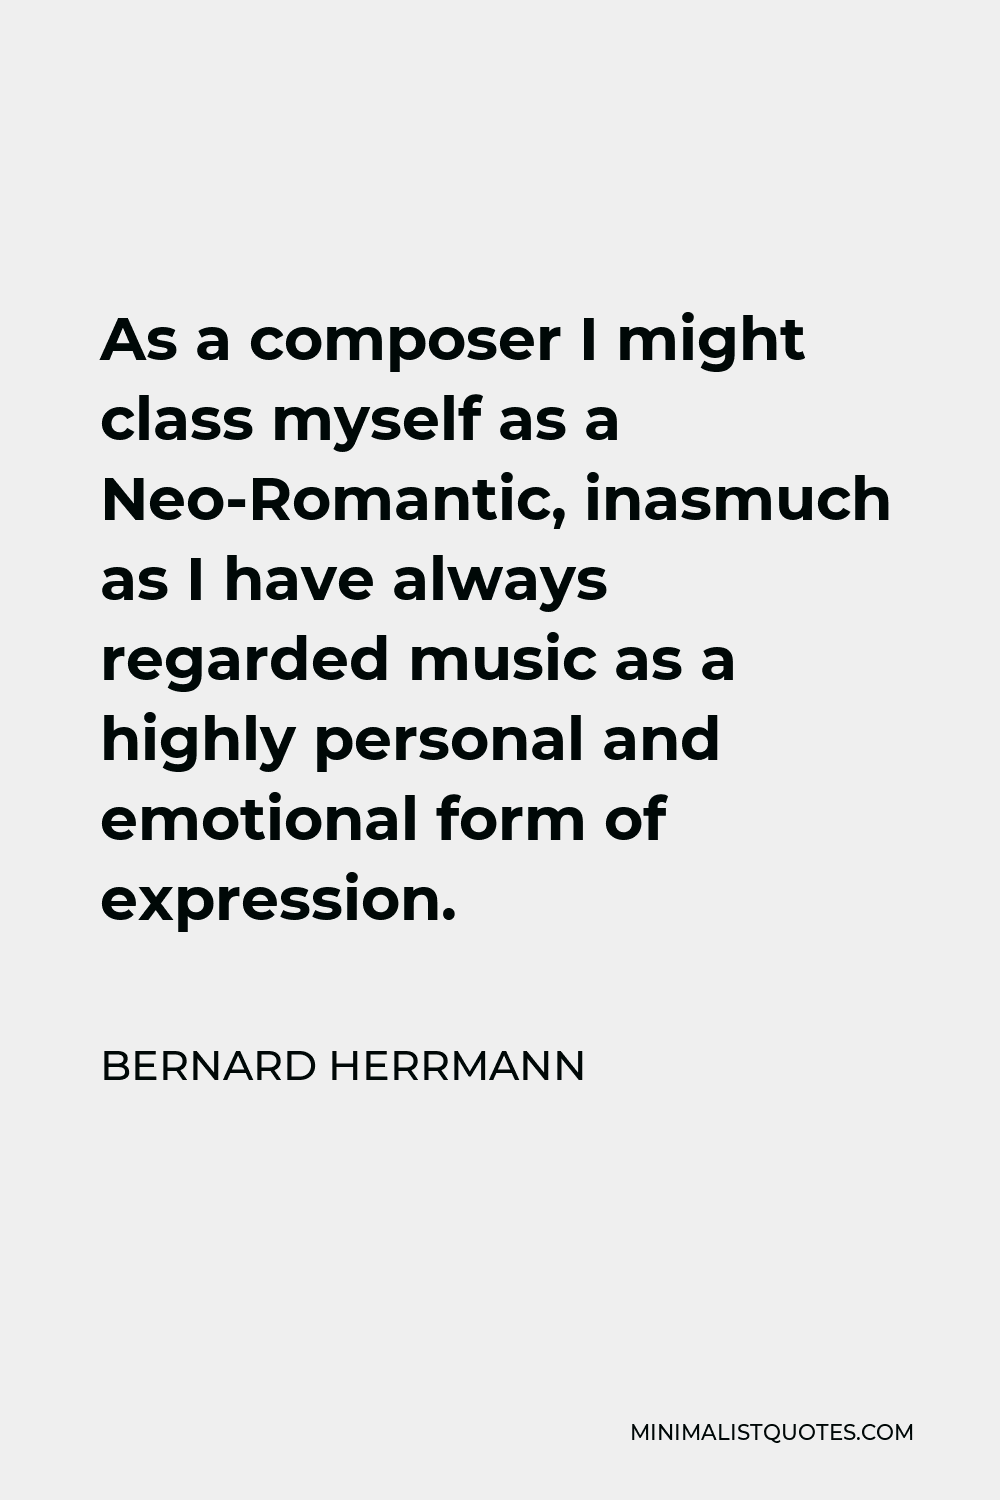 Bernard Herrmann Quote - As a composer I might class myself as a Neo-Romantic, inasmuch as I have always regarded music as a highly personal and emotional form of expression.